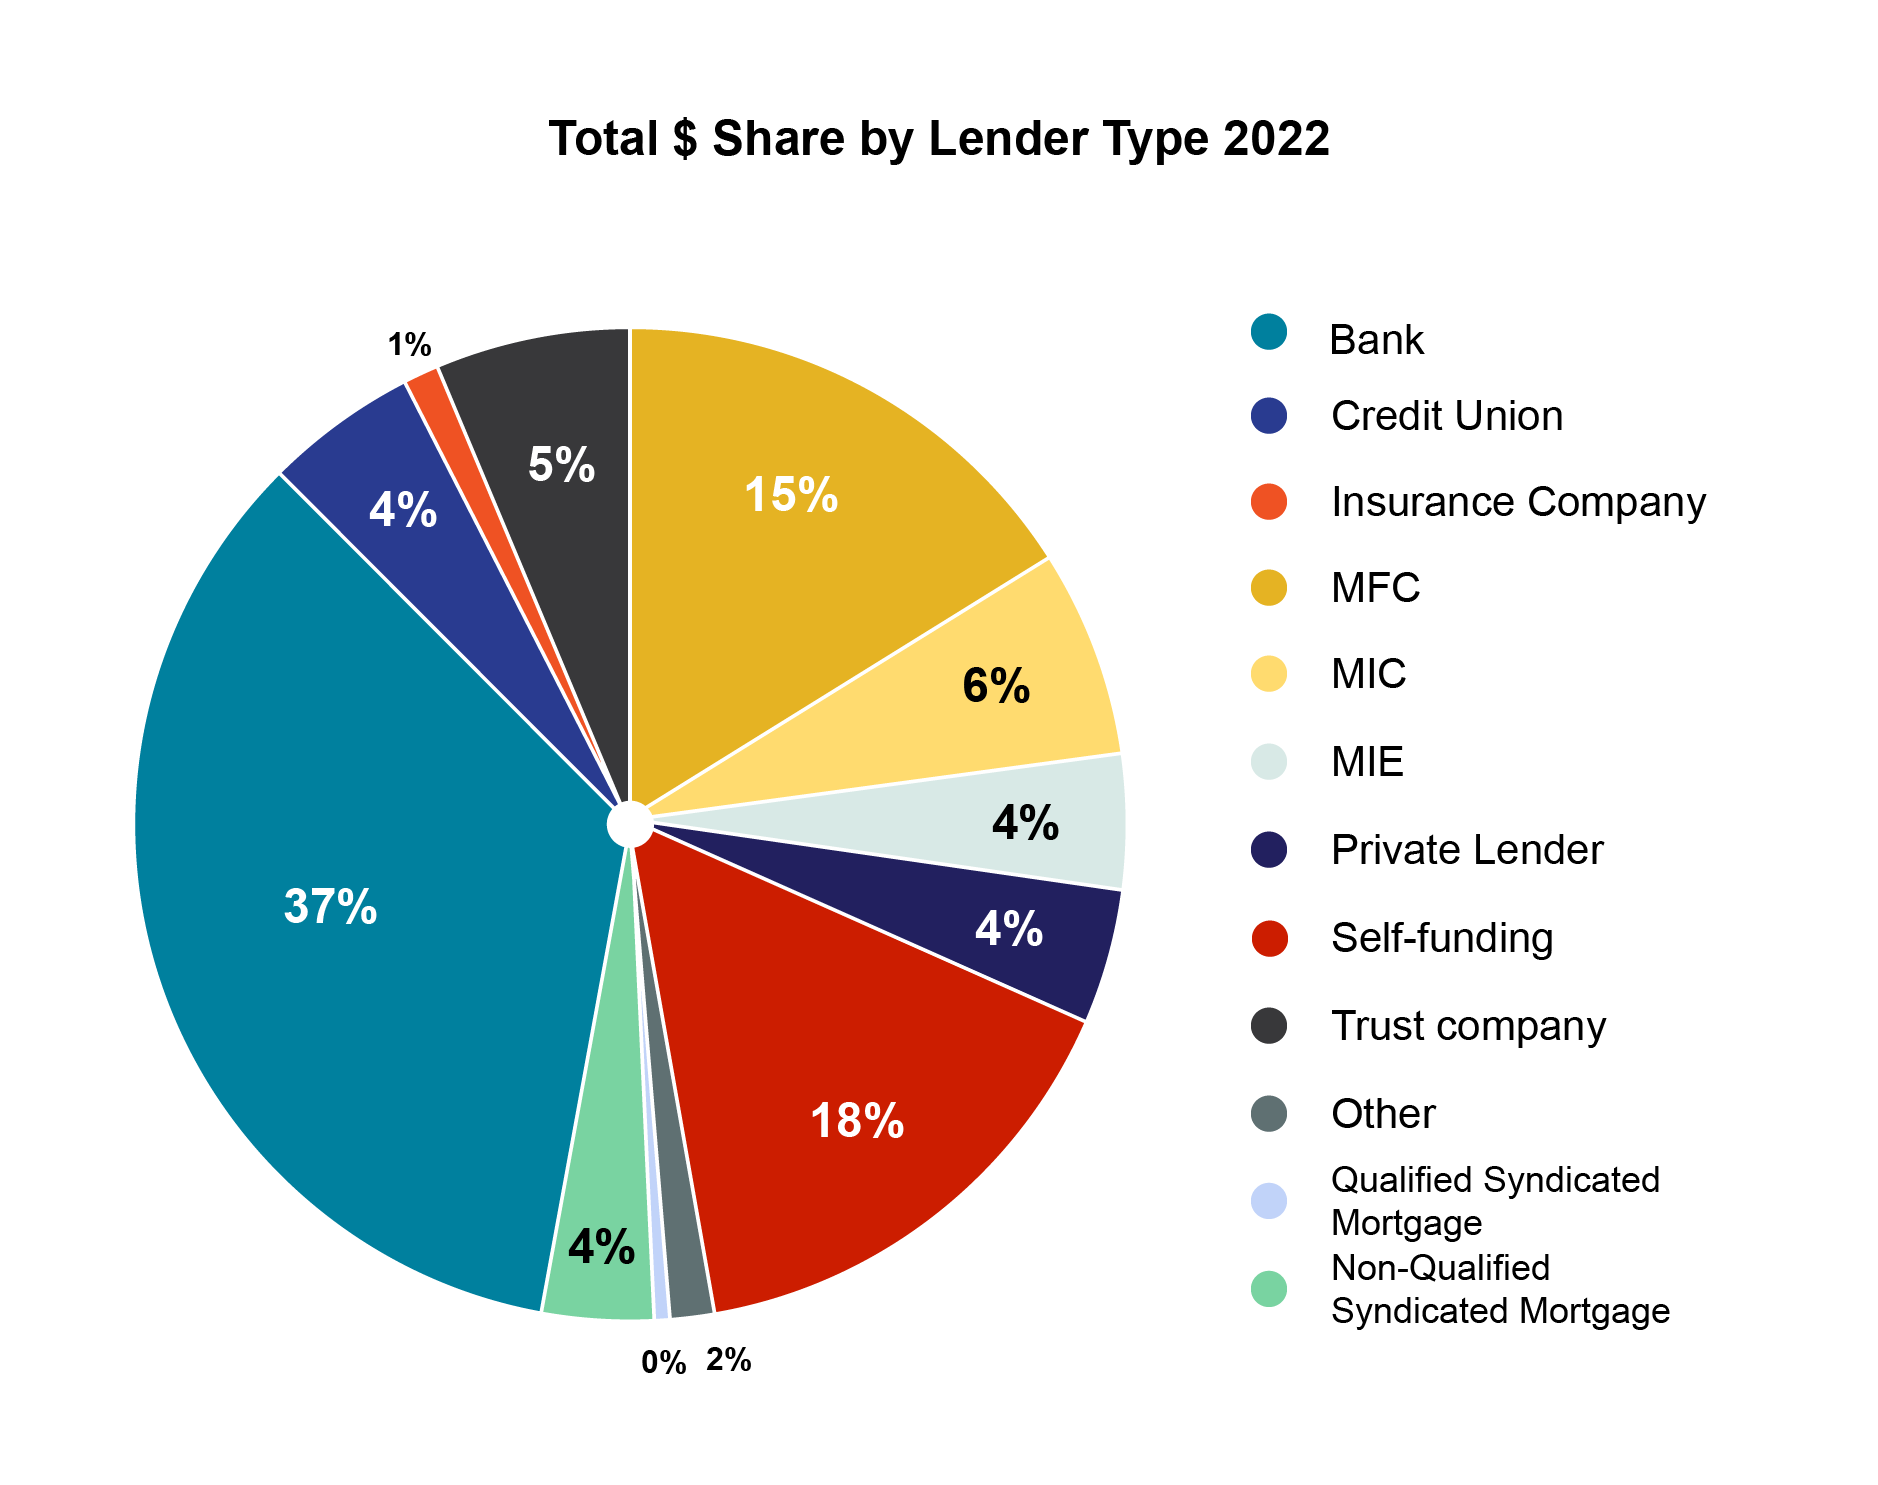 Total $ share by lender type 2022